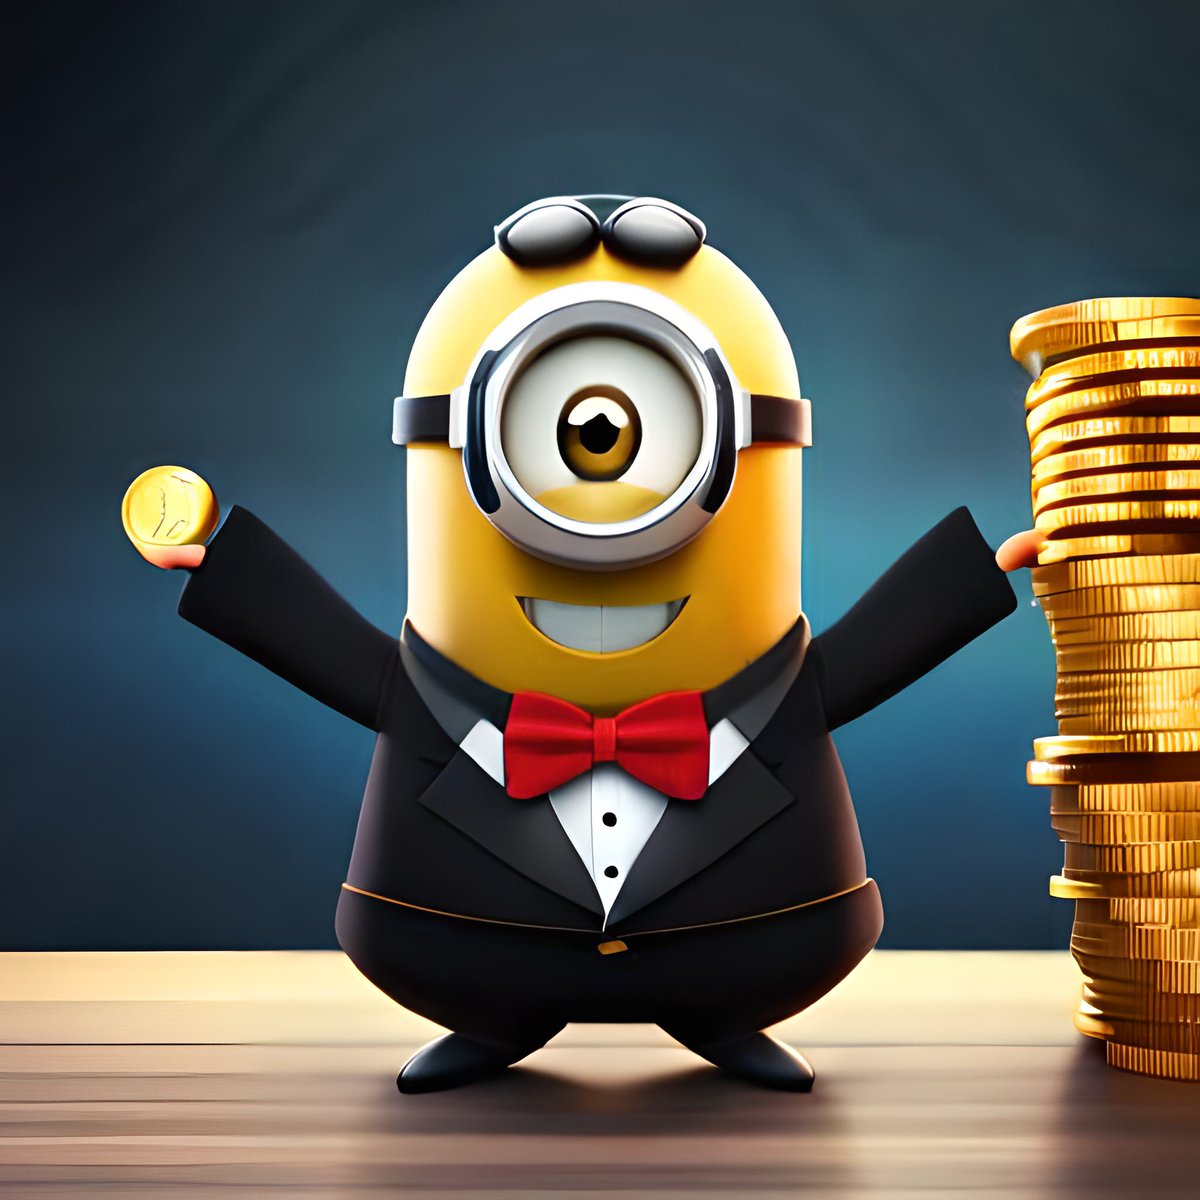 🚀 Hey Minionaires! The journey has just begun! 🌟 Let's keep the excitement alive as we continue to support and grow our incredible project. Fun, earning, profitability, and sustainability are our guiding stars! 🌈 #MinionaireInu #CryptoSuccess